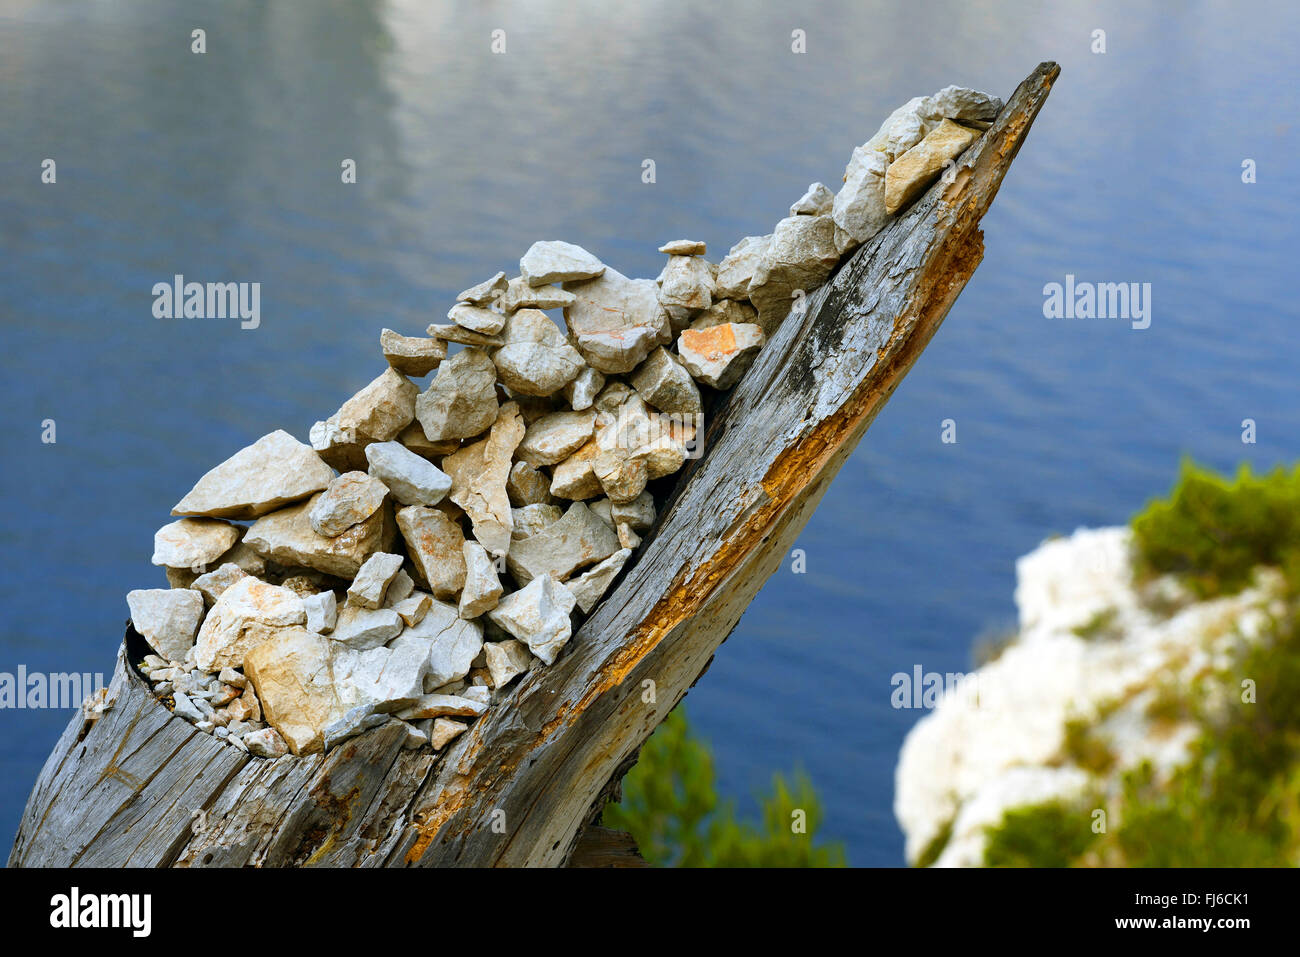 stones on tree stump, France, Calanques National Park, Marseilles Stock Photo